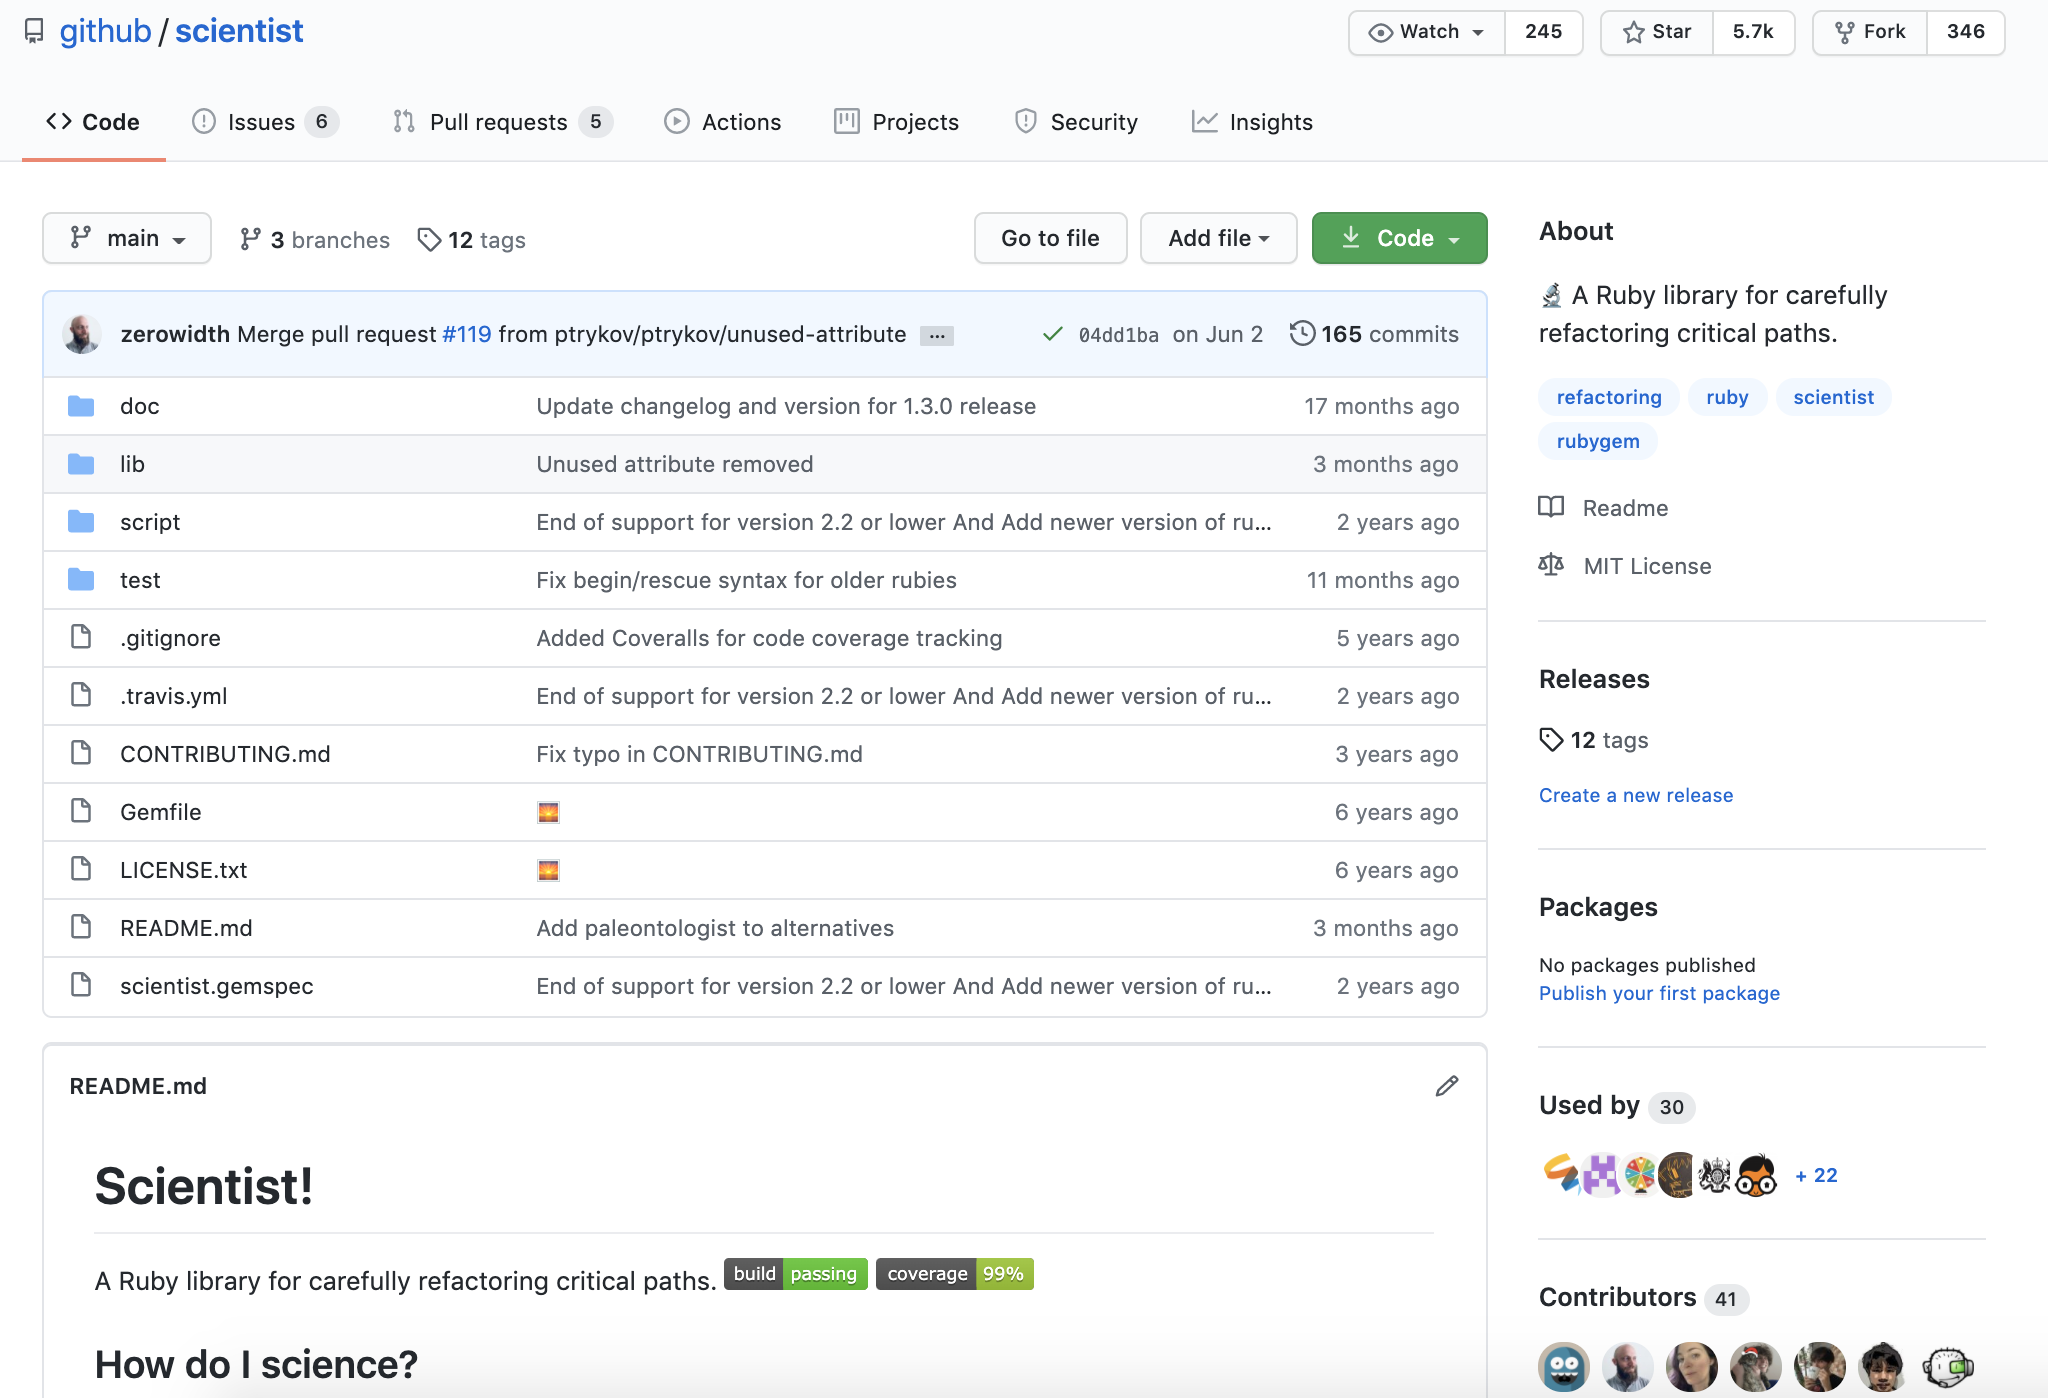 Main page of the github/scientist repository and its README file